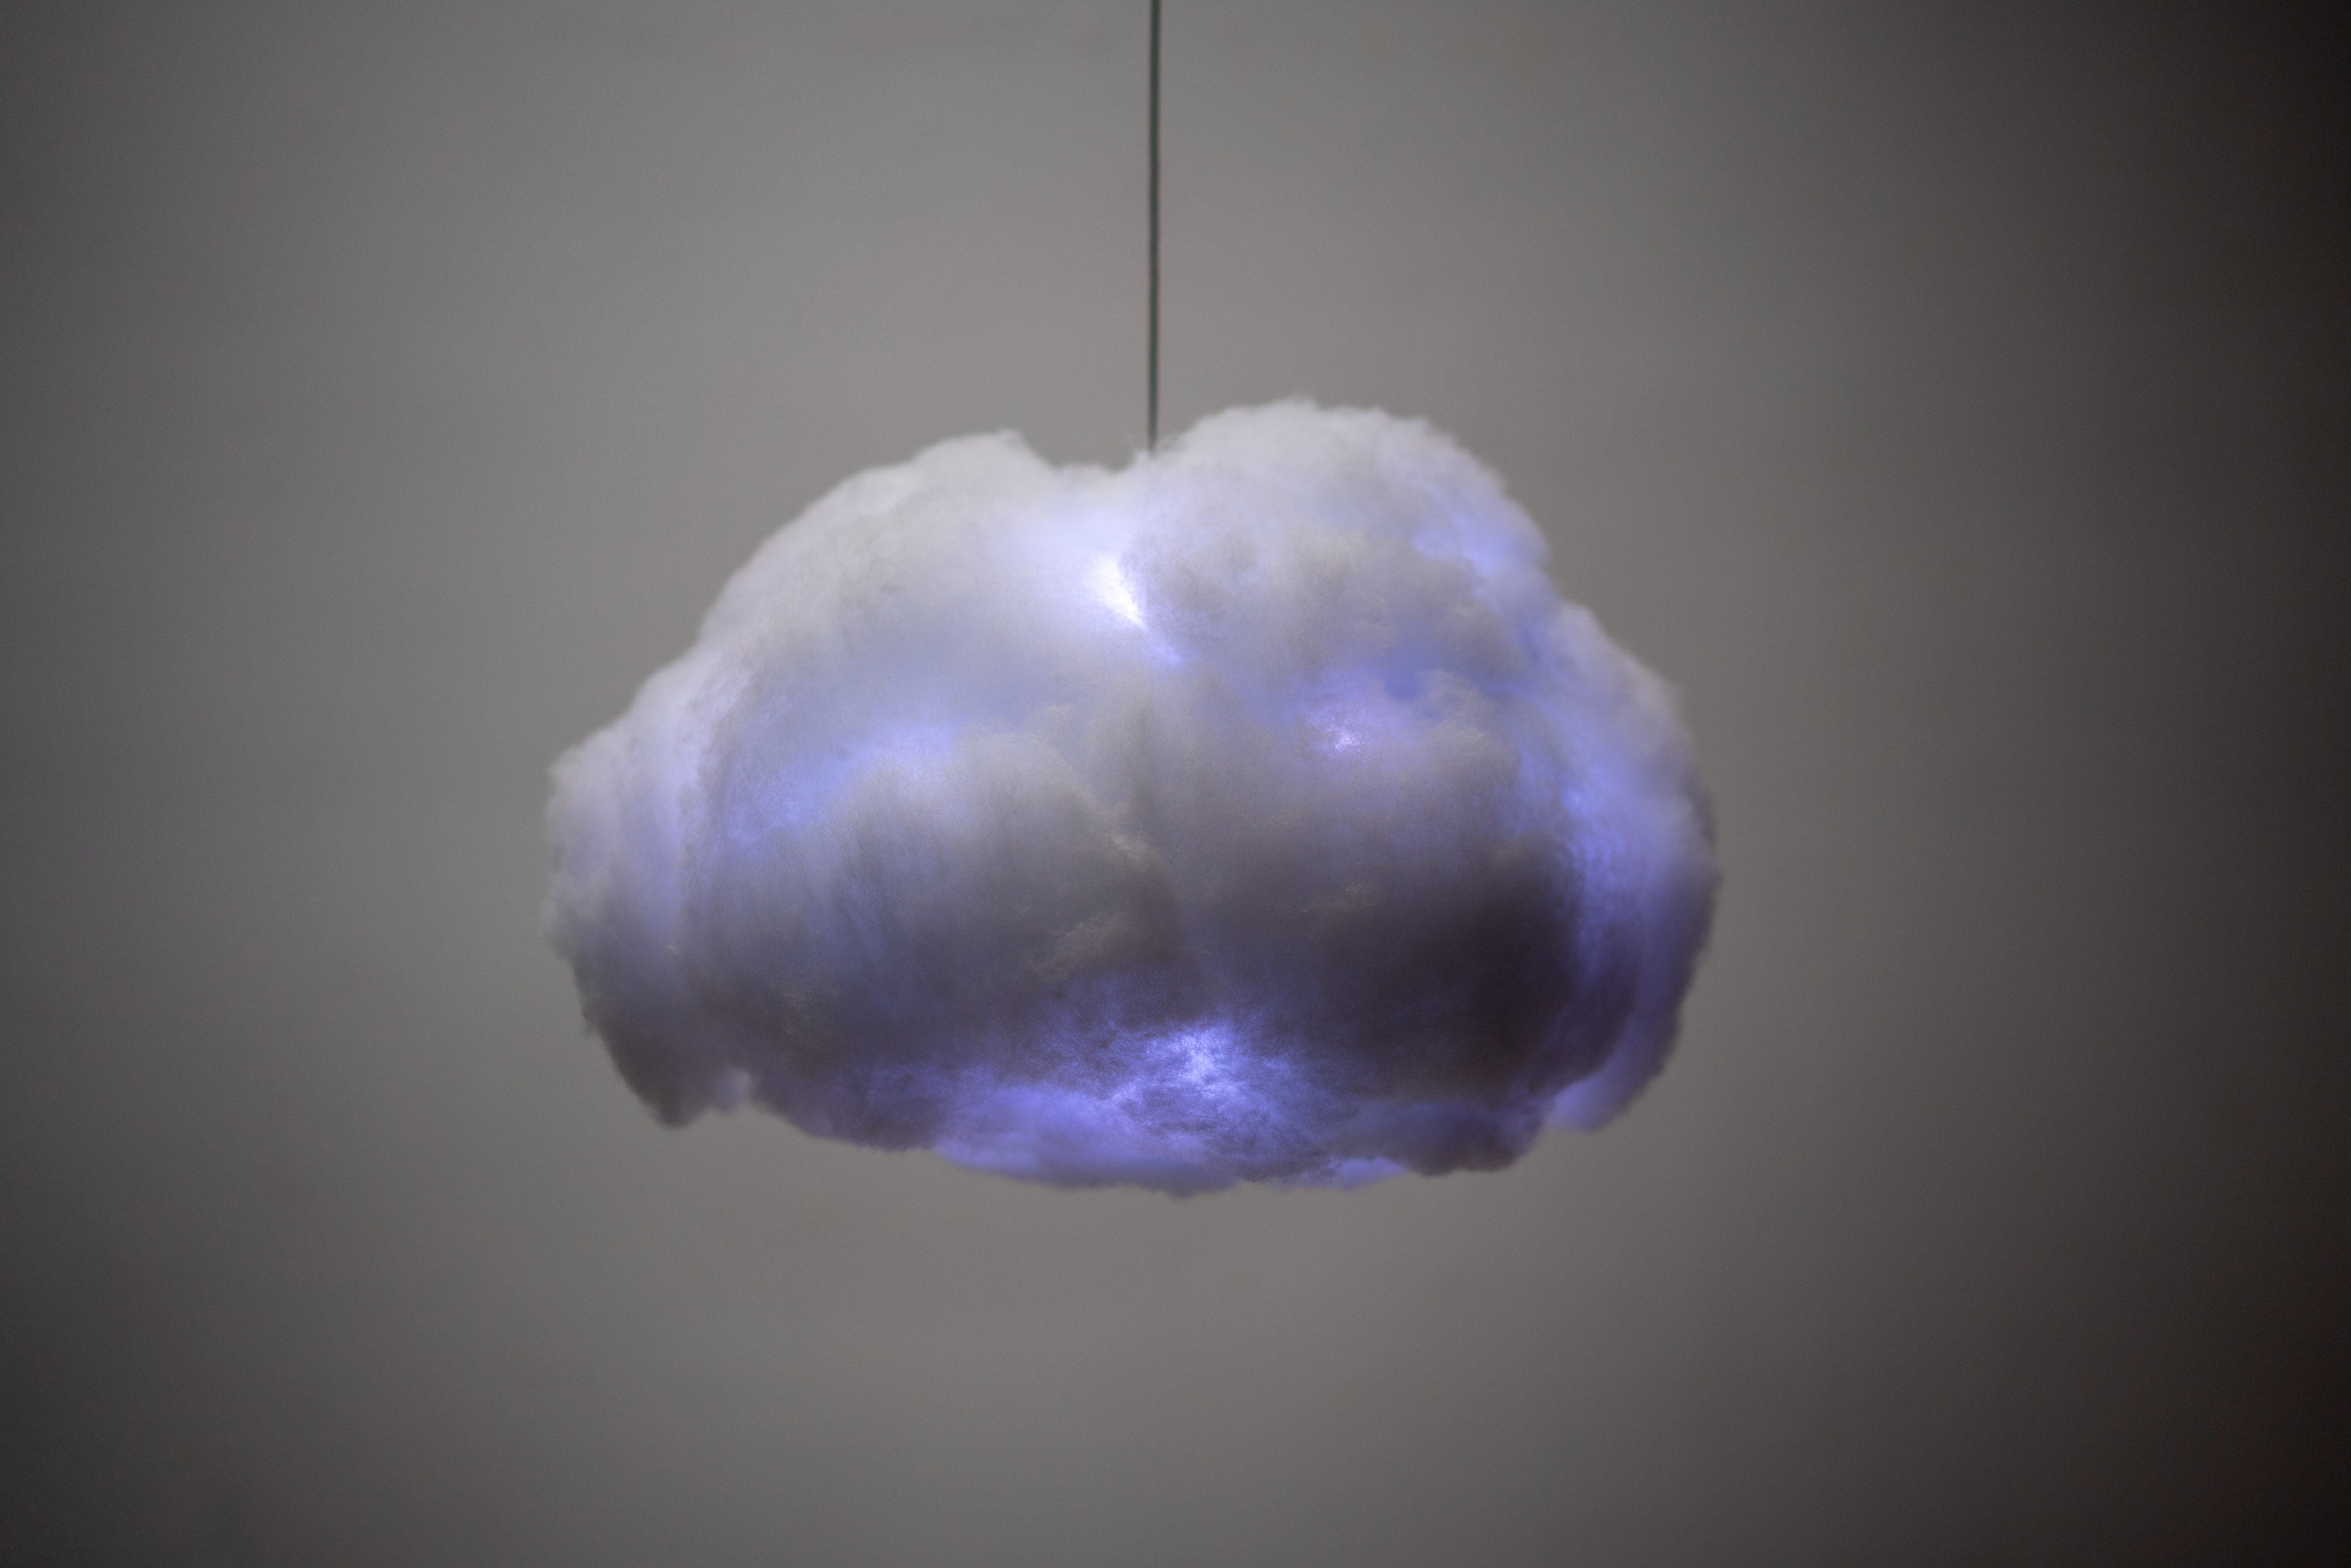 One of a series of Lighting systems inspired by the magic of clouds coupled with advances in technology, the Interactive Cloud is an LED lamp incorporating advanced sound-reactive and ambient lamp modes. Available in three sizes Small, Medium, and